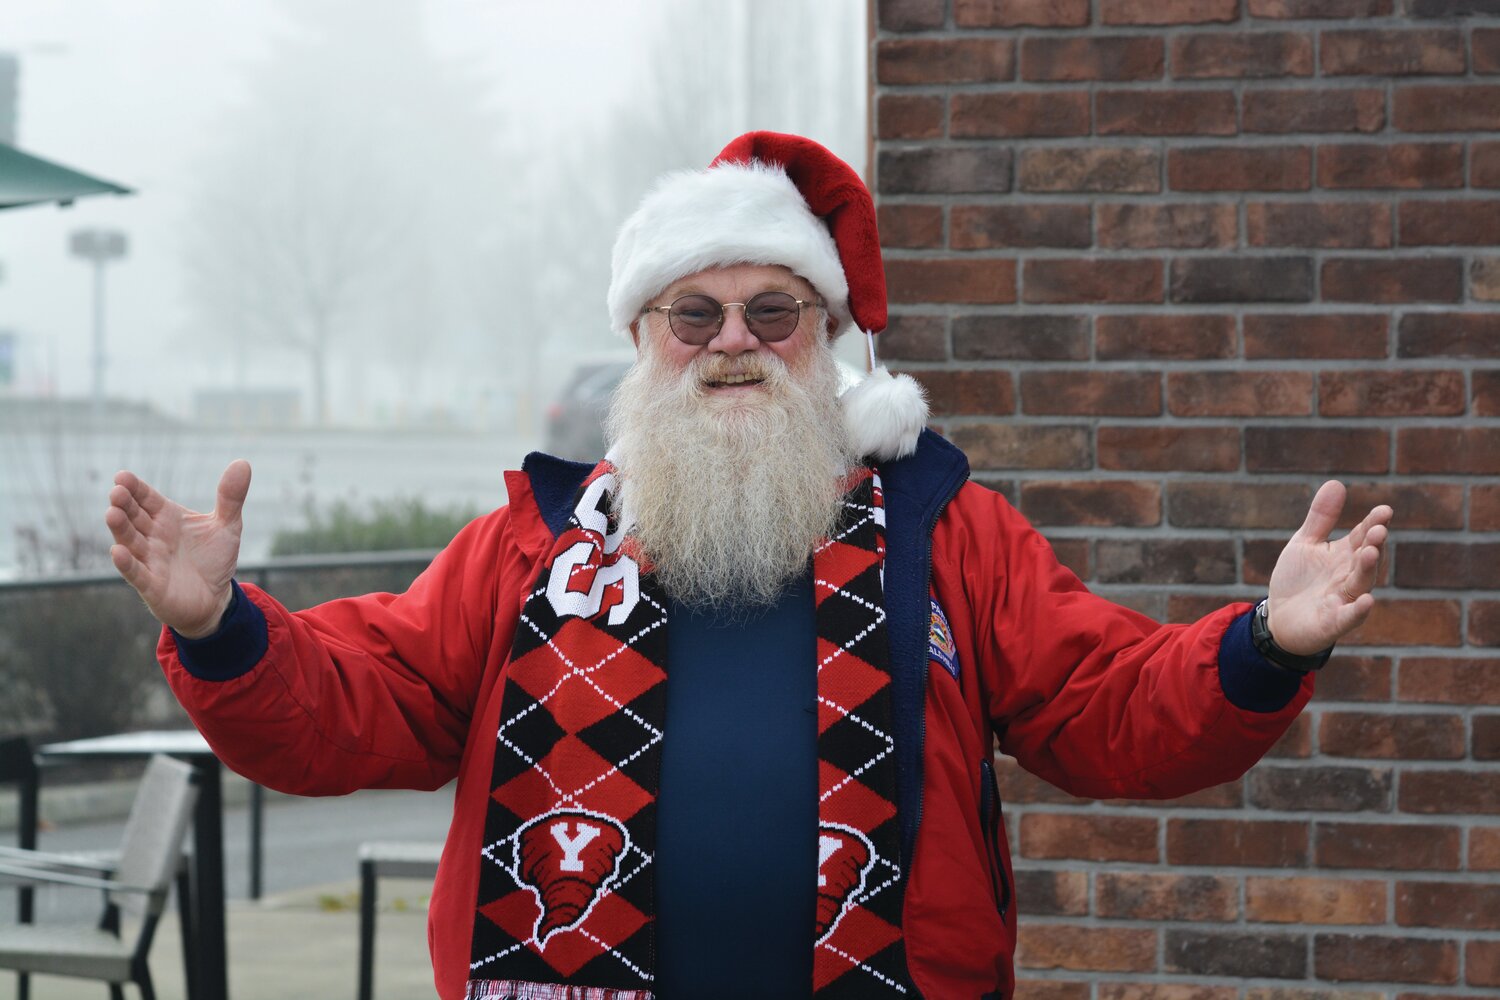 Harry Miller, also known as Santa within Yelm and surrounding areas, smiles for a photo on Nov. 27.